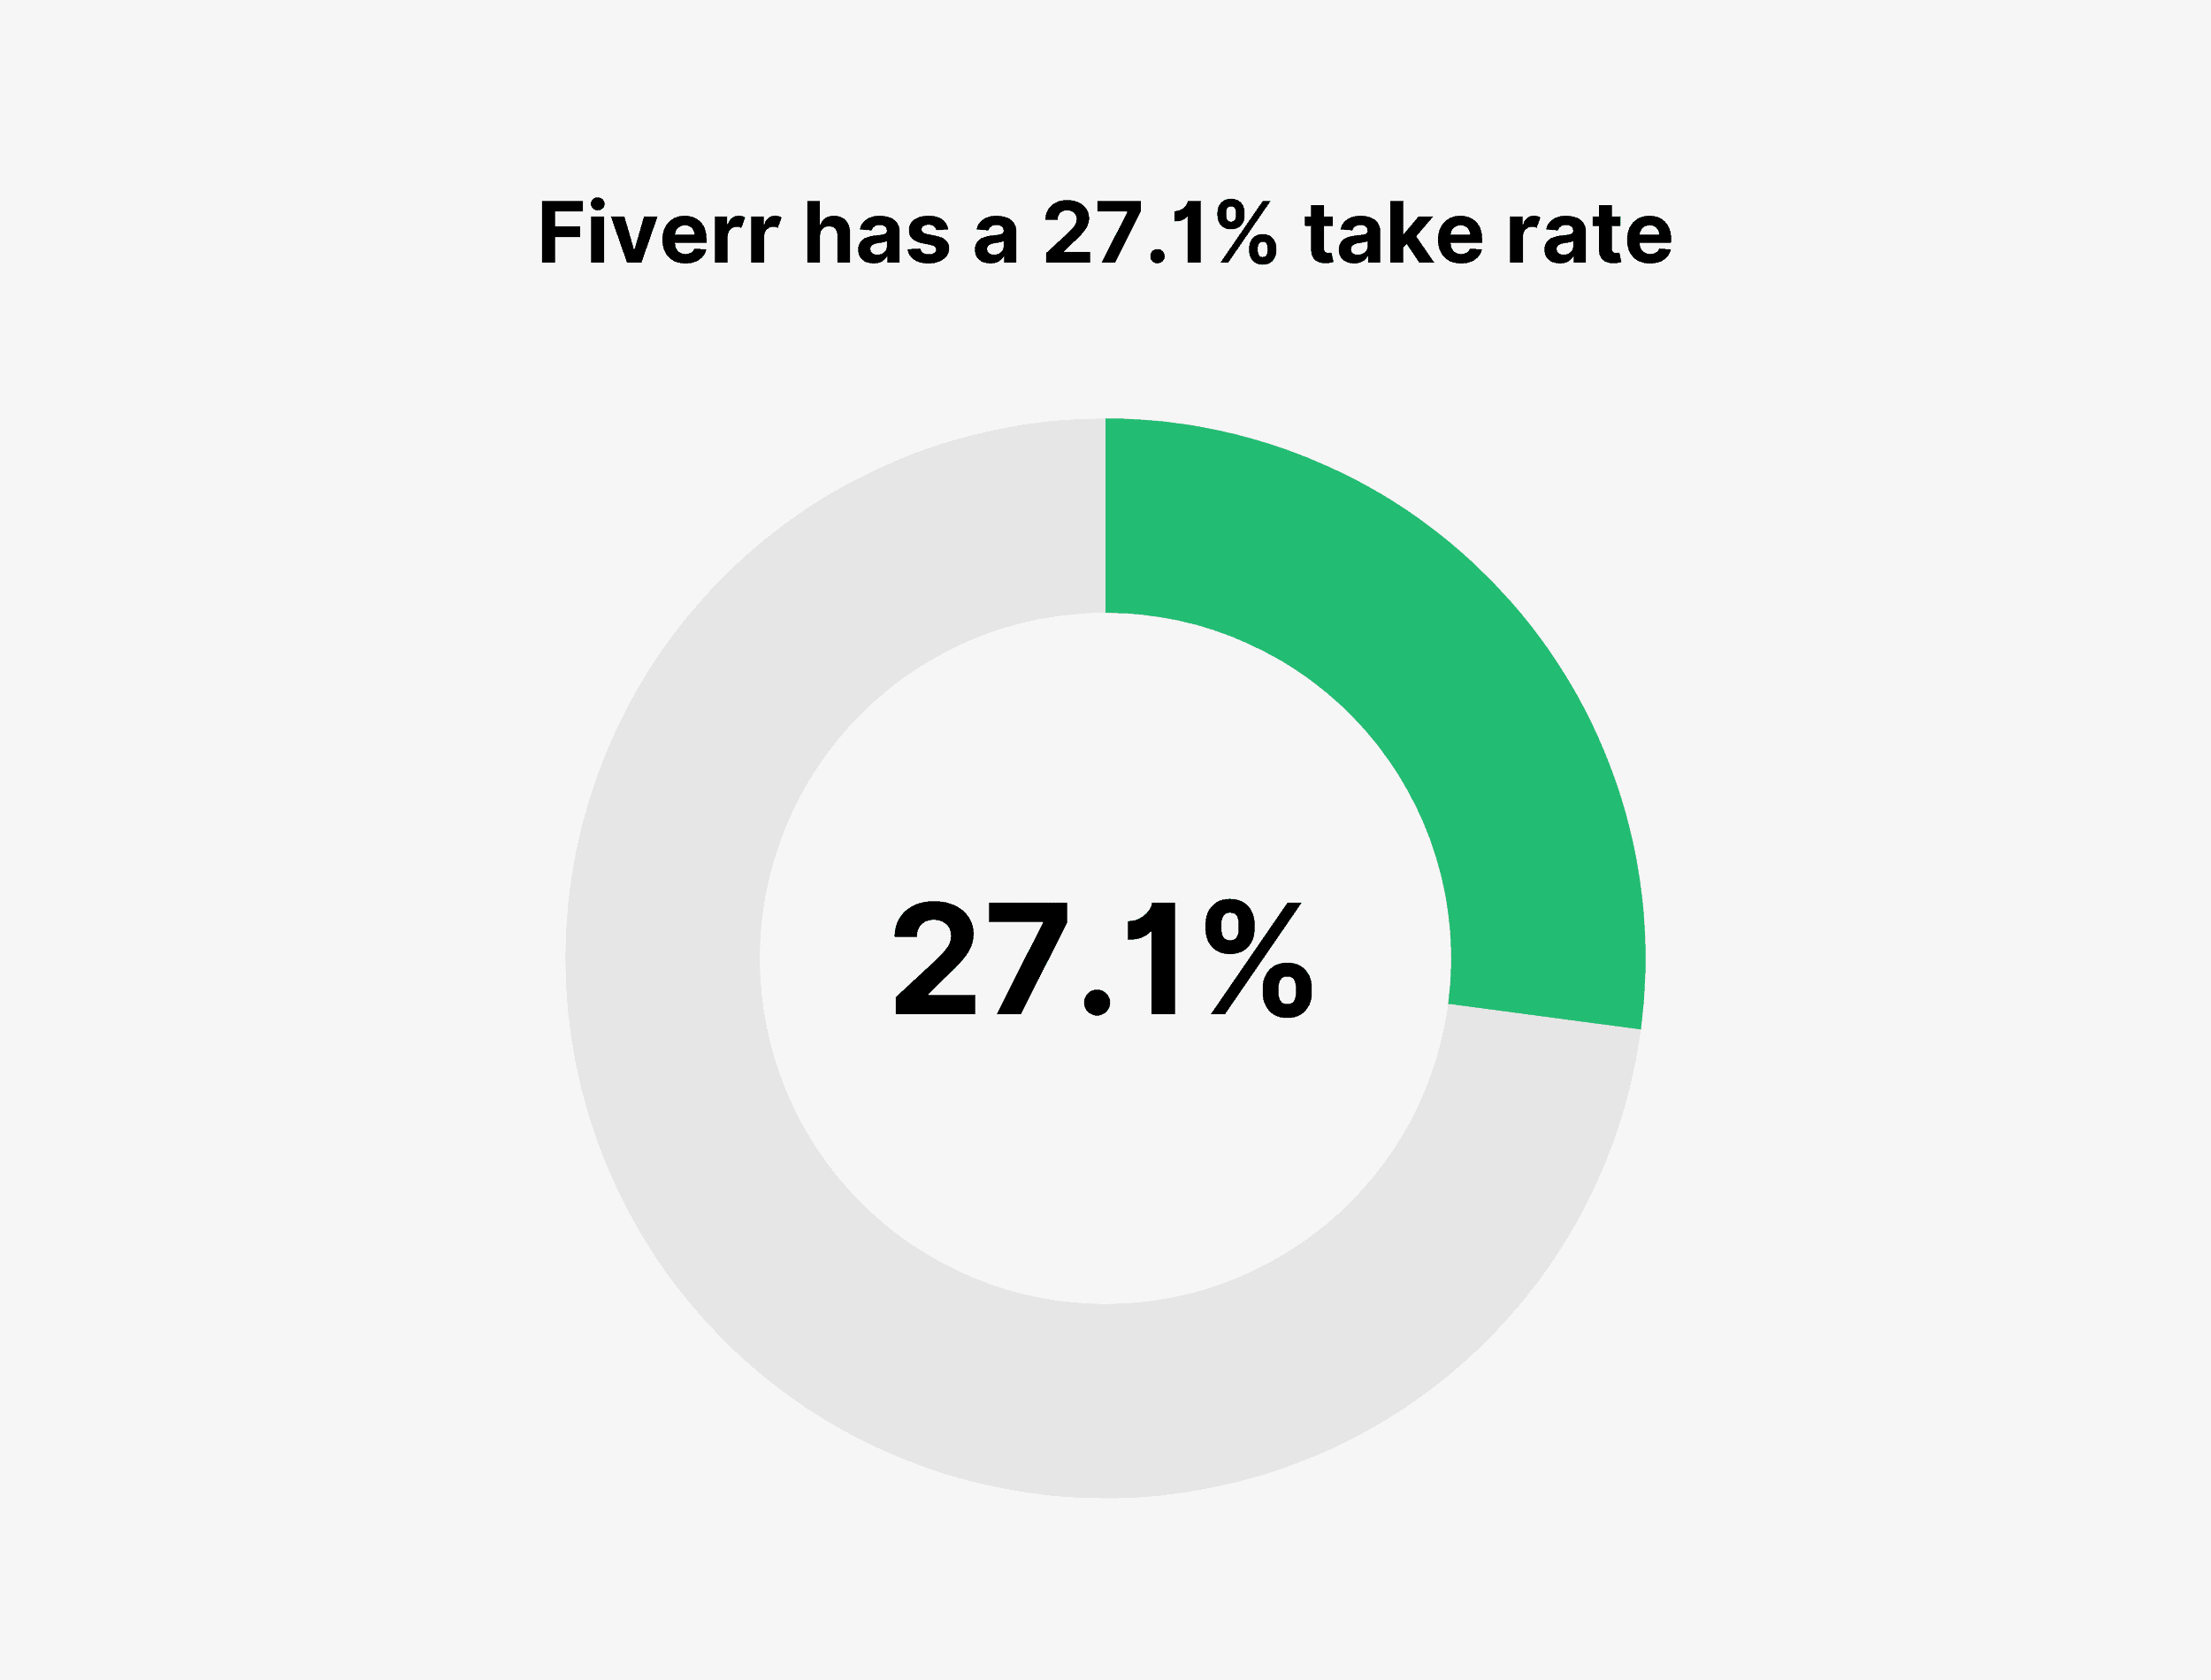 Fiverr has a 27.1% take rate